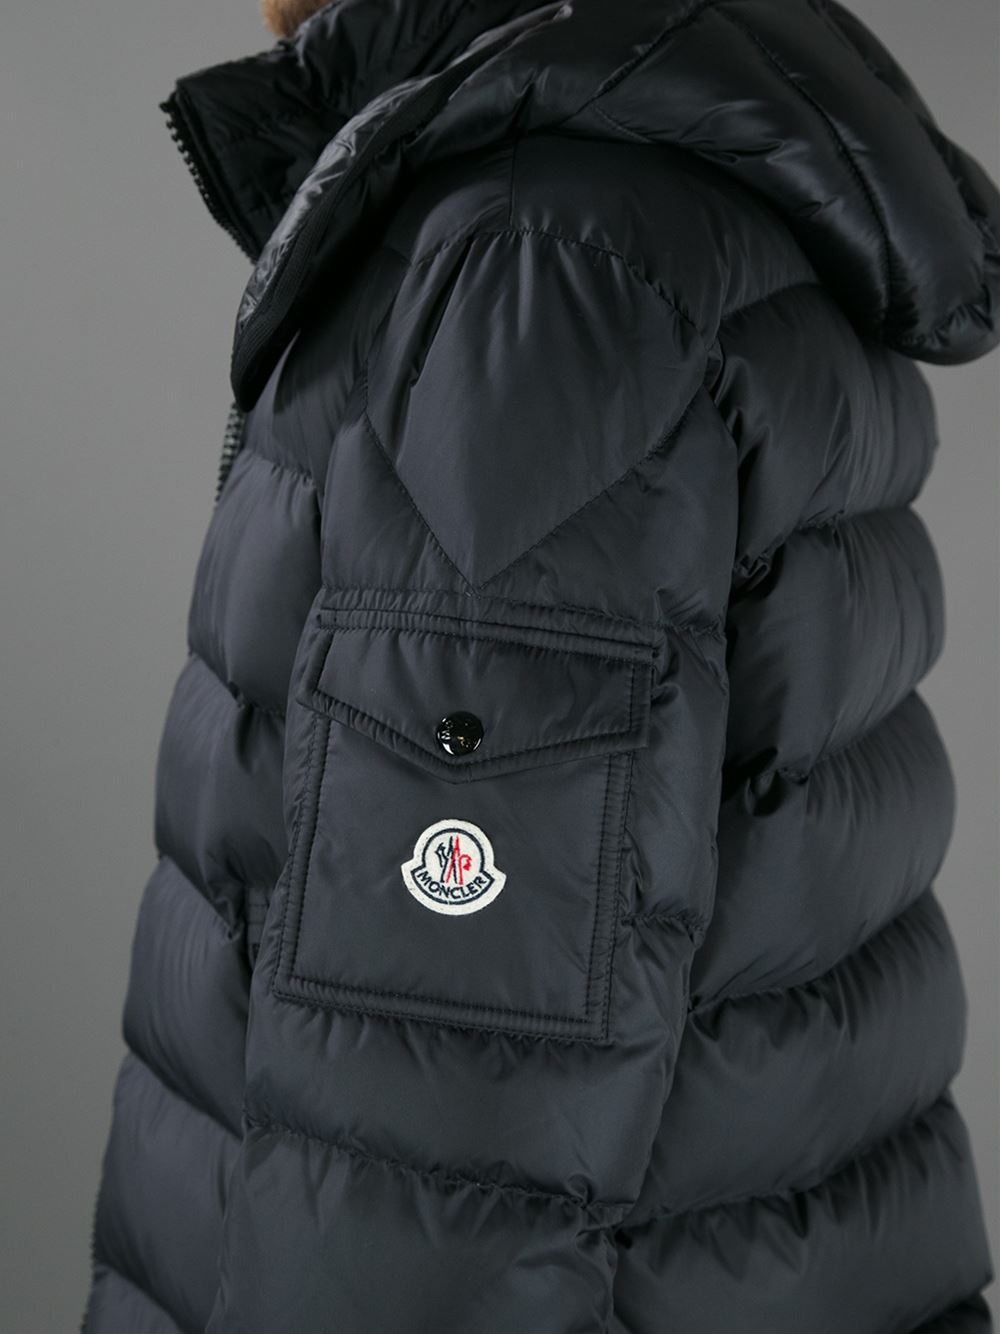 Lyst - Moncler 'hymalay' Jacket in Black for Men